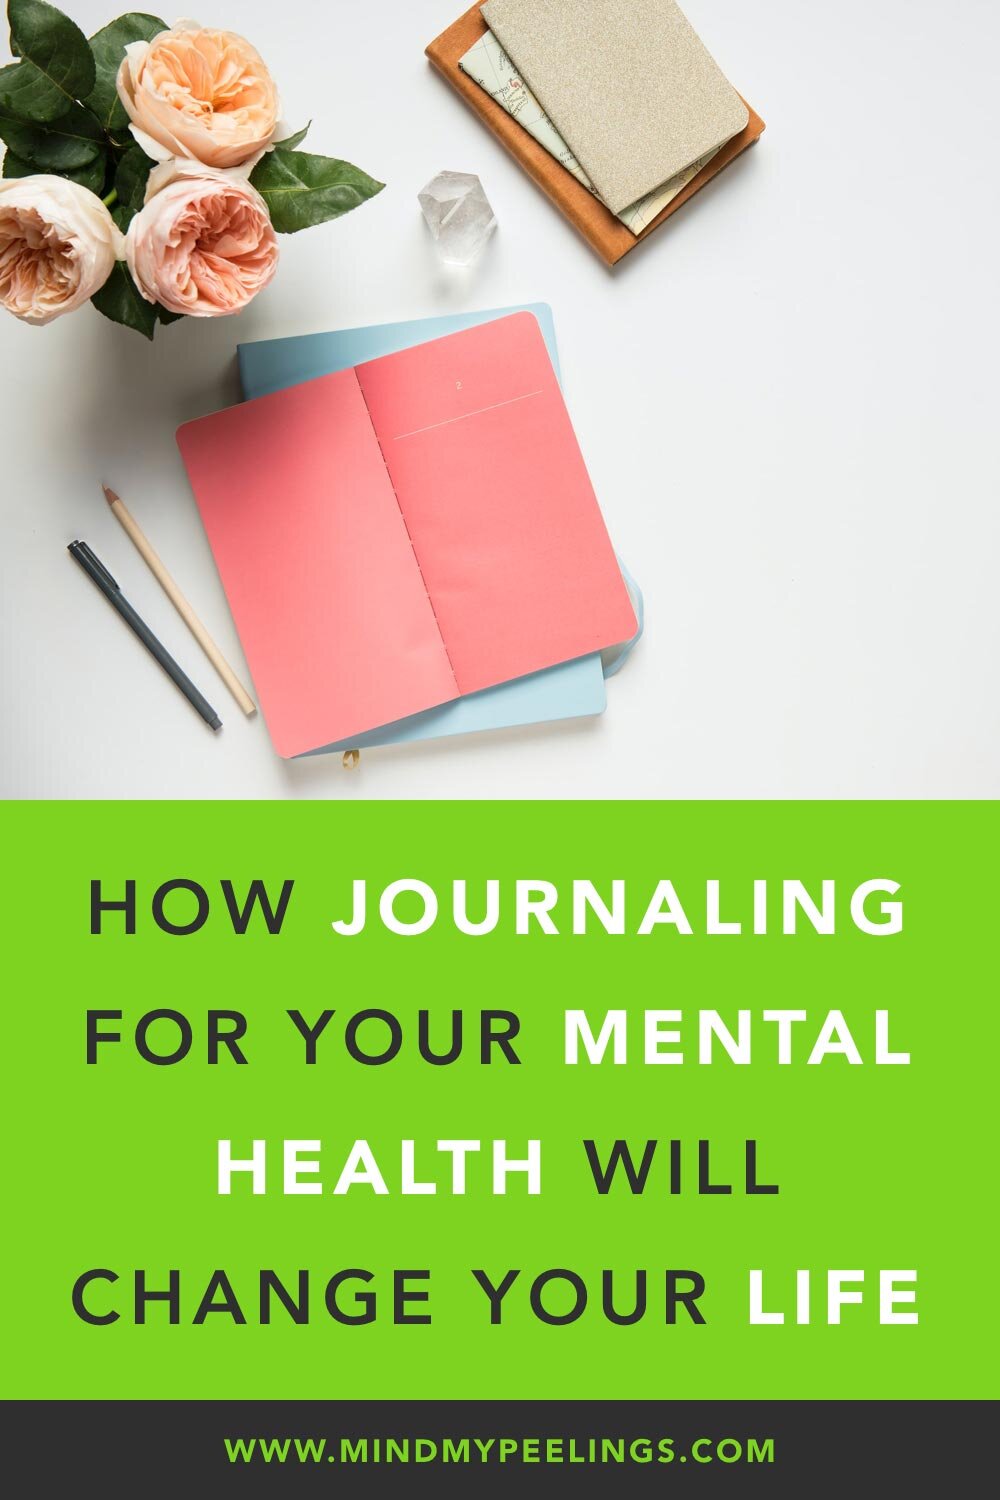 The Great Book of Journaling: How Journal Writing Can Support a Life of  Wellness, Creativity, Meaning and Purpose (How to Journaling Self-Help)